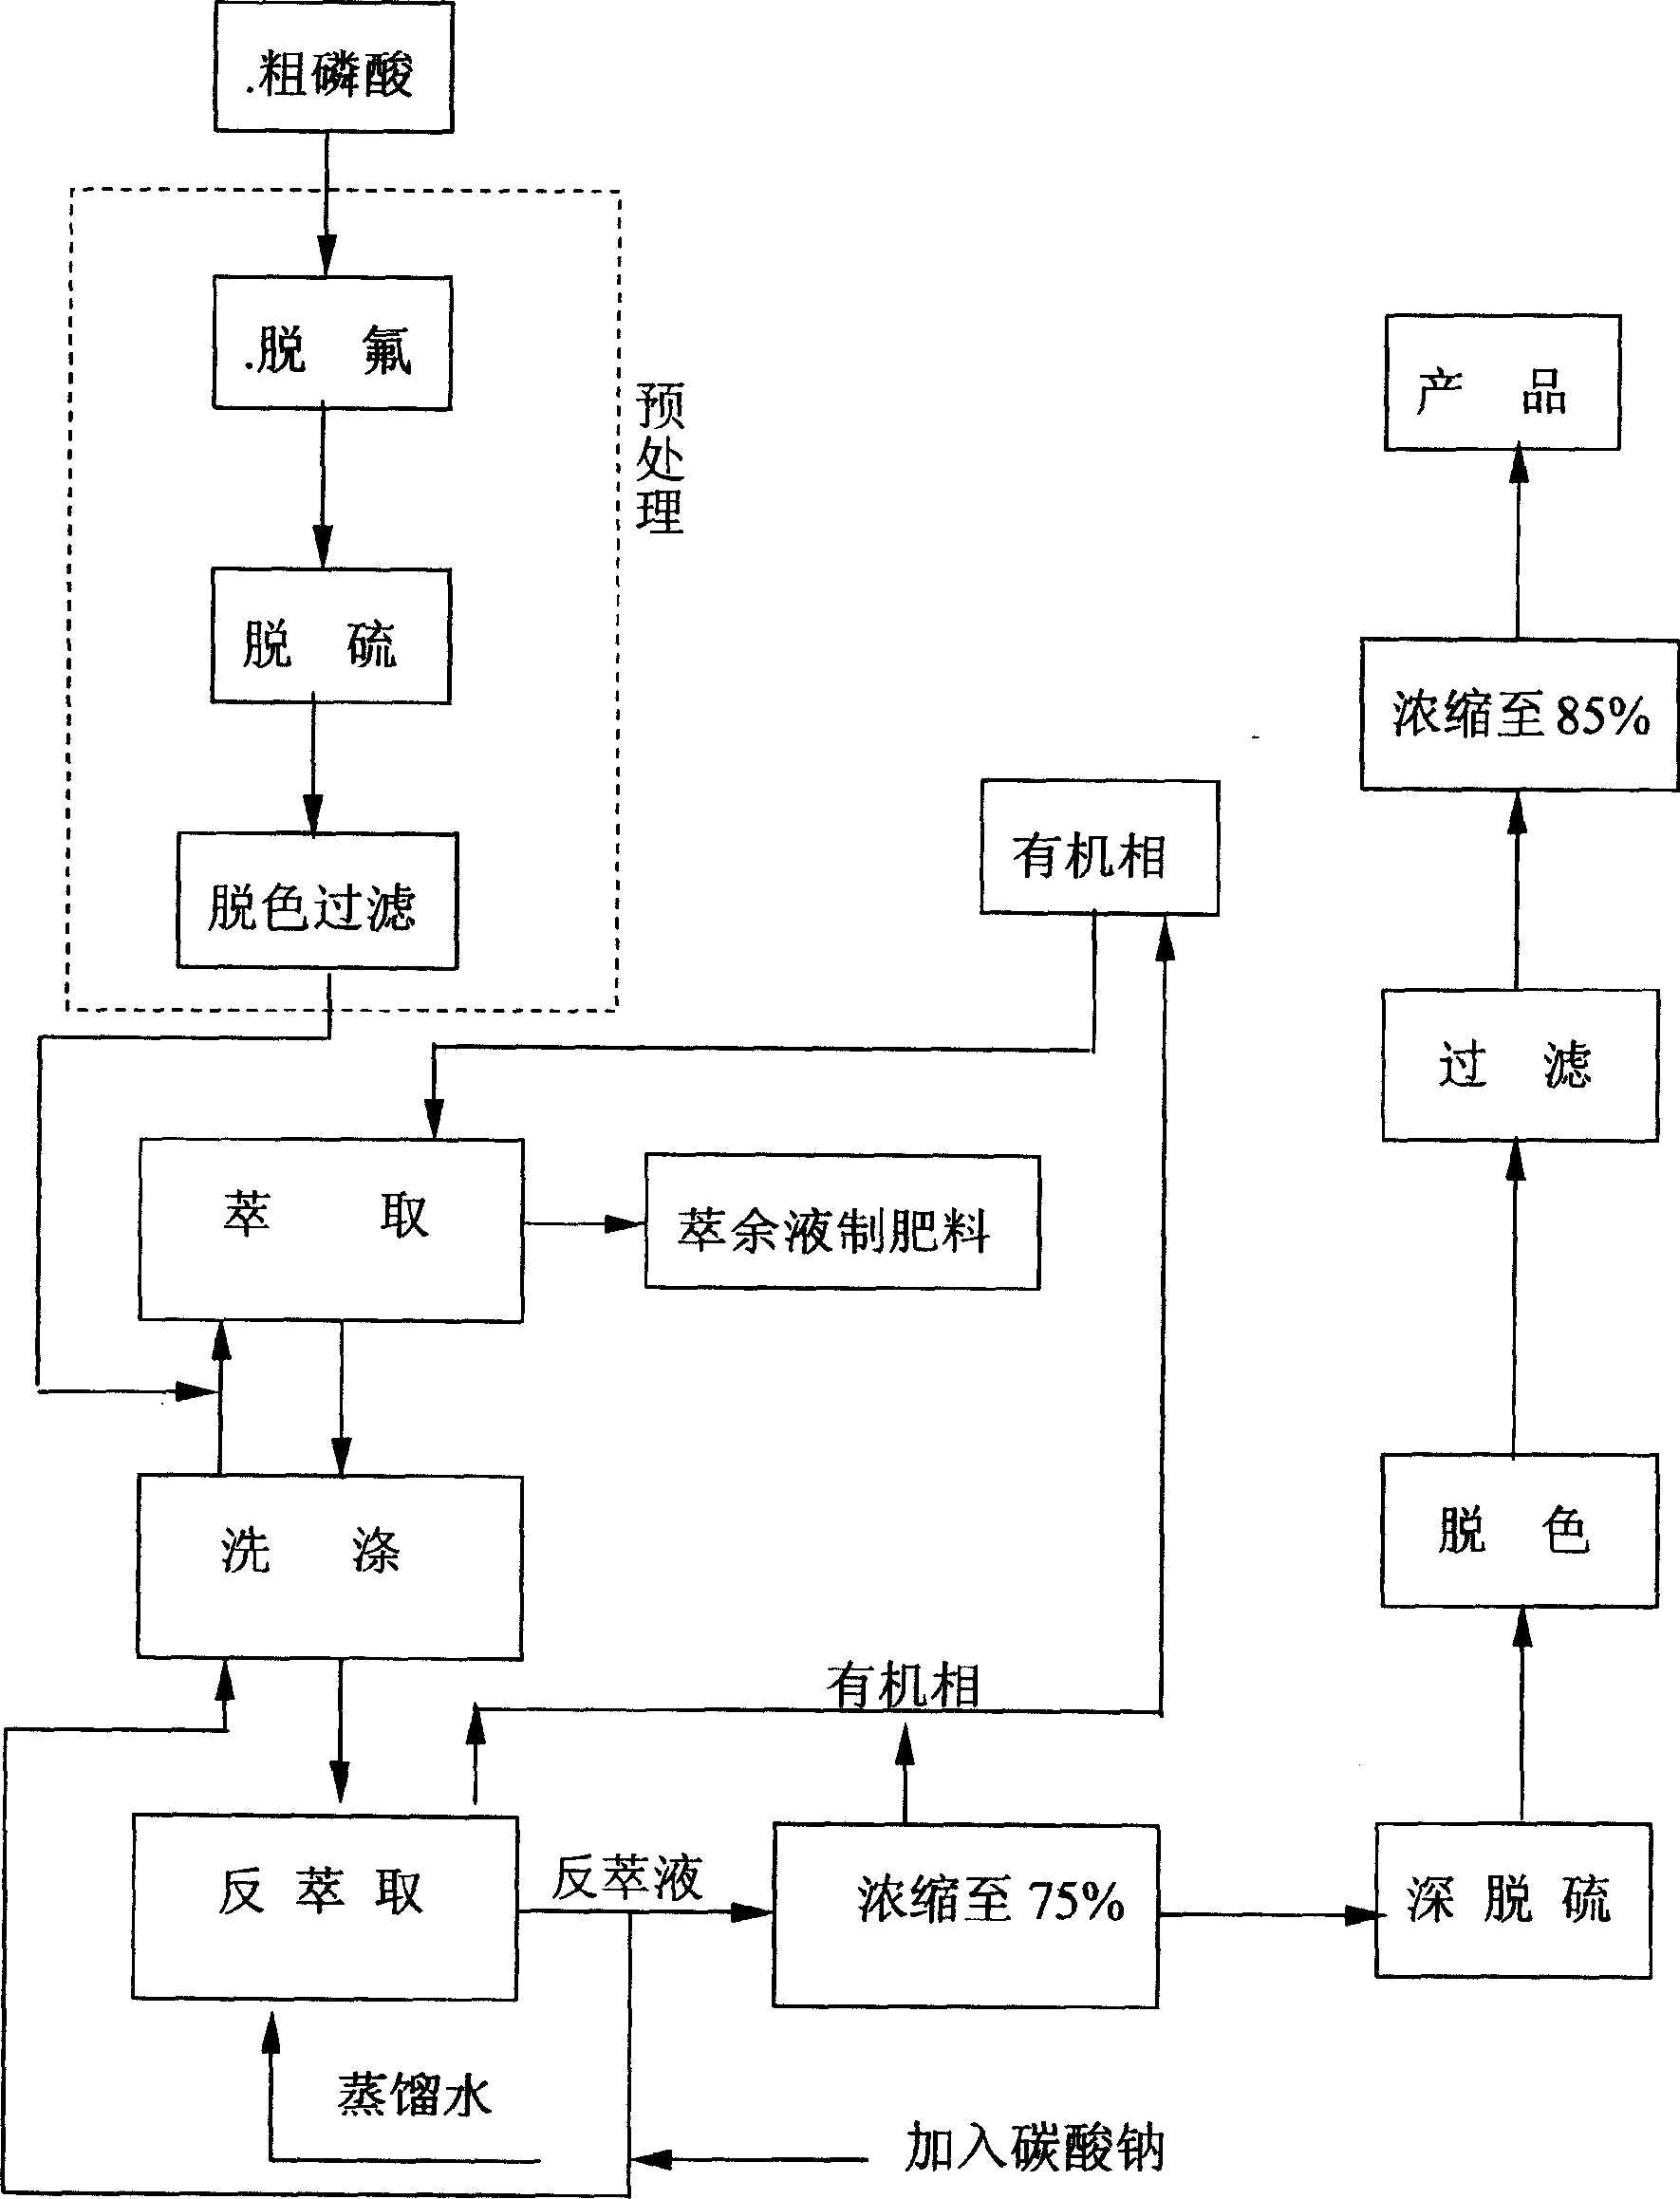 Method of solvent extraction purification of wet method phosphoric acid produced from medium and low grade phosphosus ore